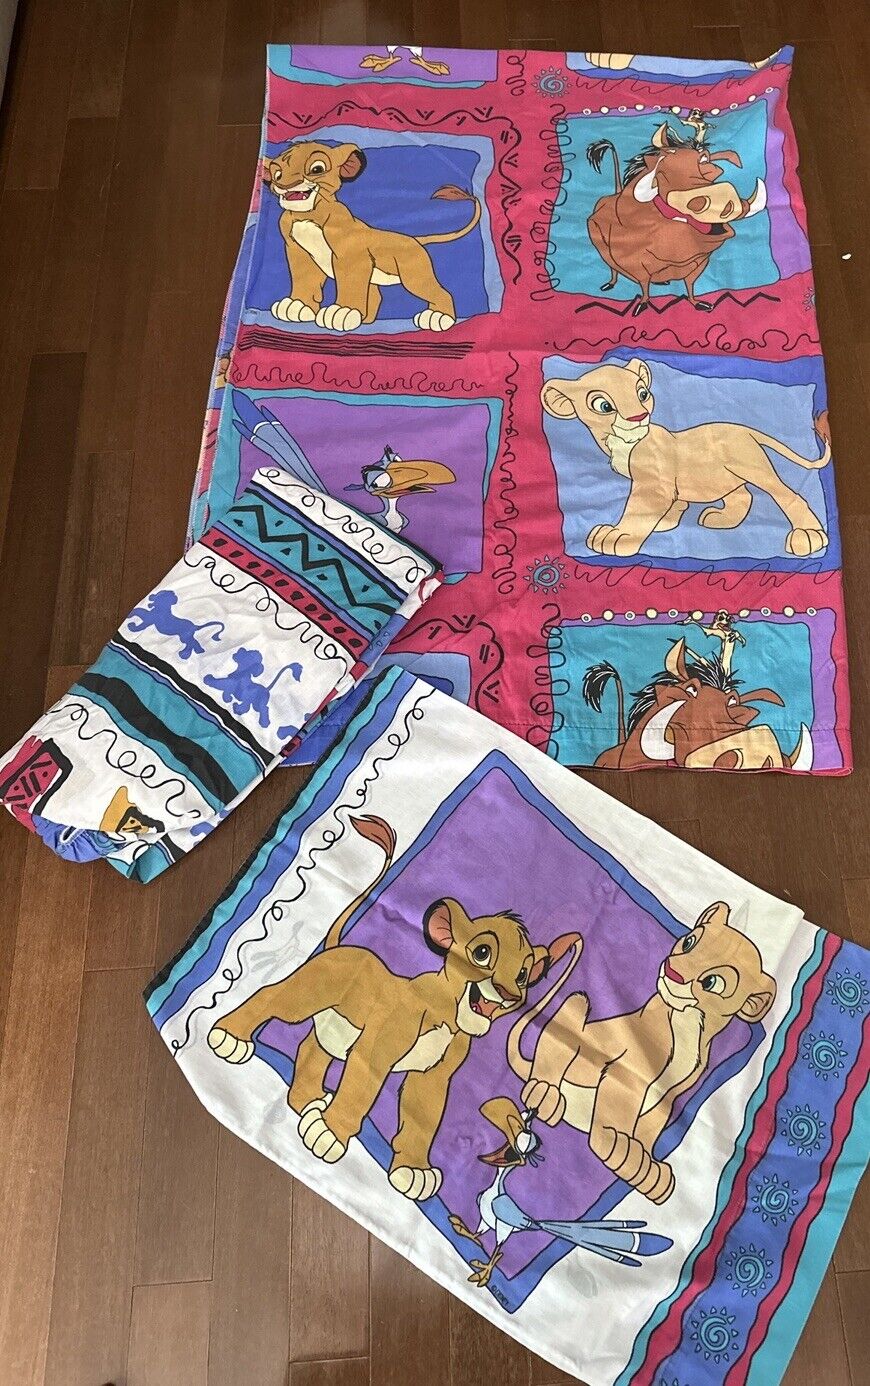 VTG Disney The Lion King Twin Size Complete Bed Sheet Set Flat Fitted Pillowcase